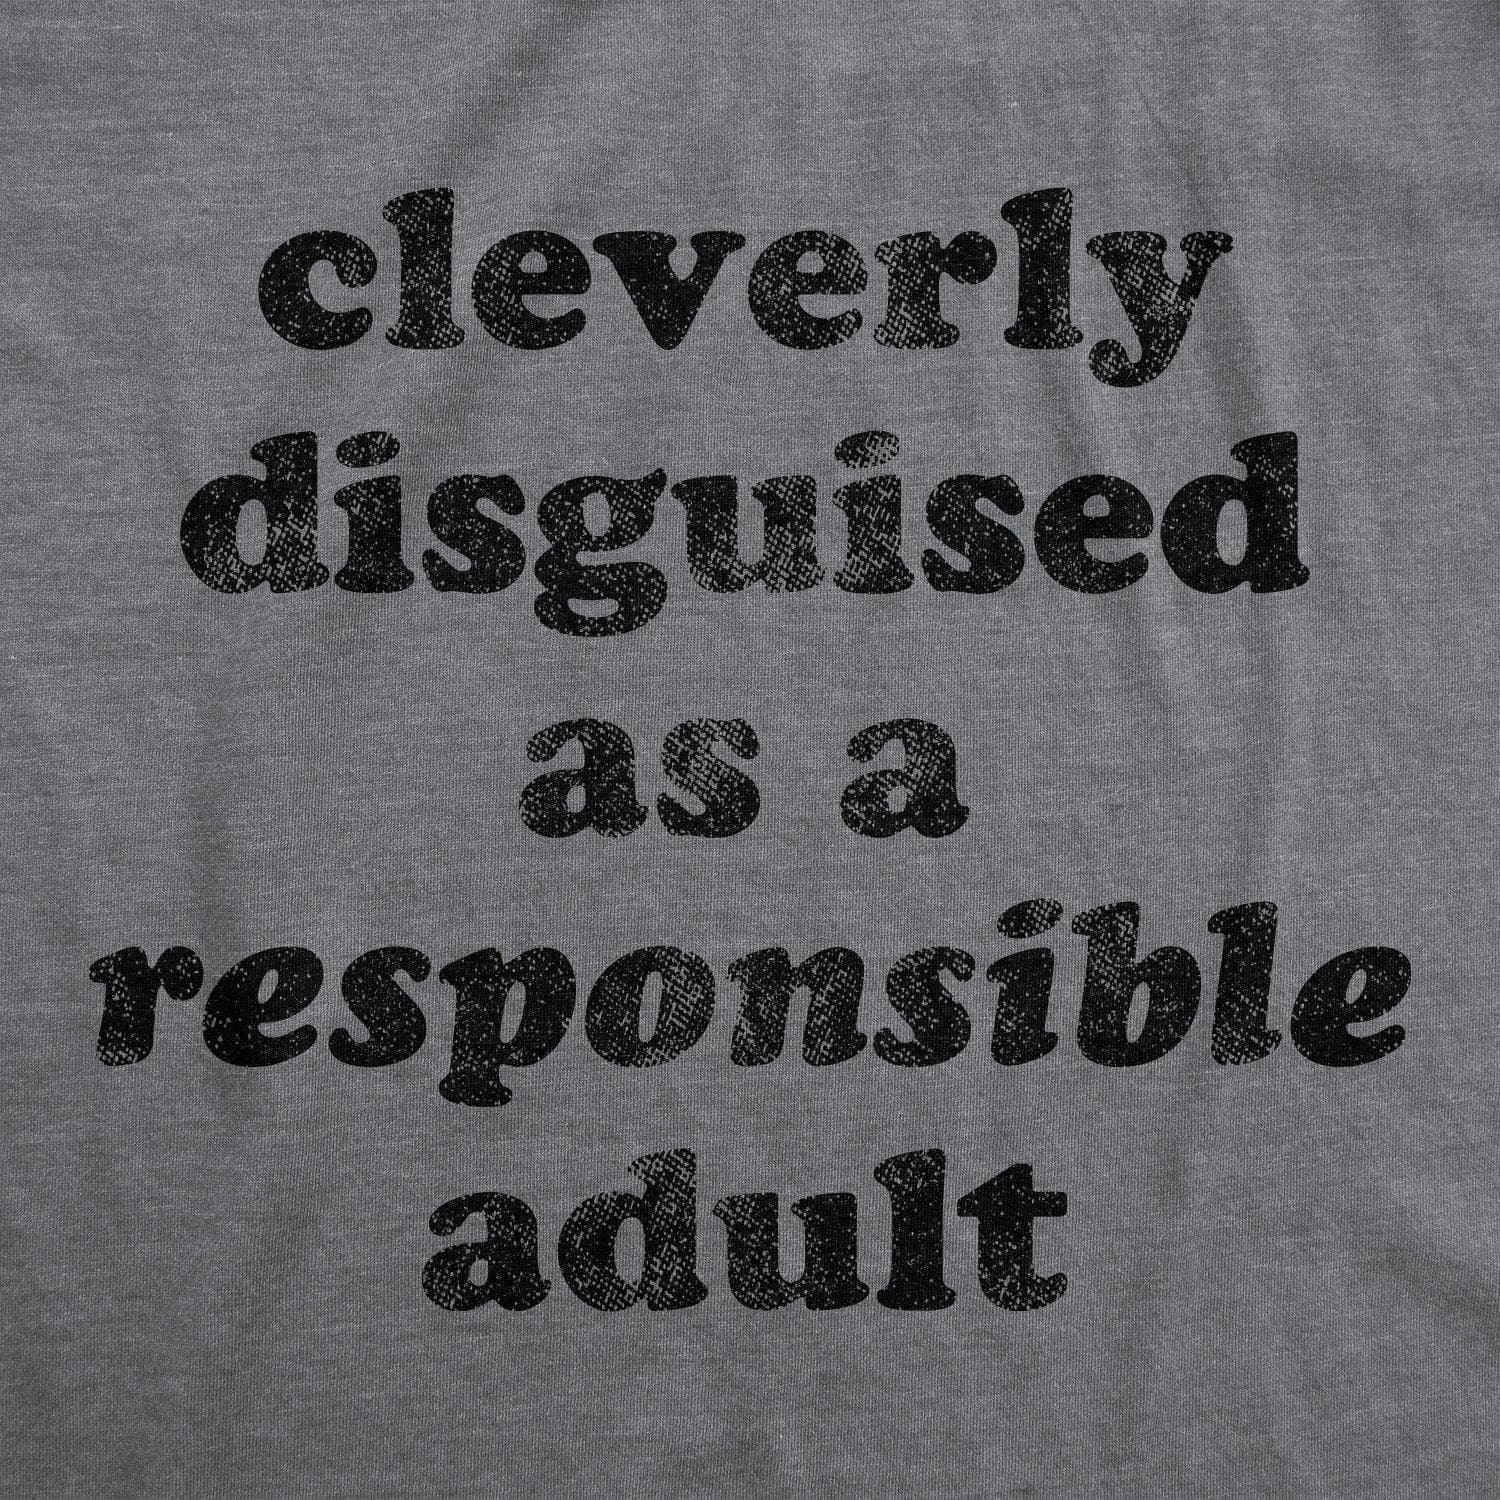 Cleverly Disguised As A Responsible Adult Men's Tshirt - Crazy Dog T-Shirts